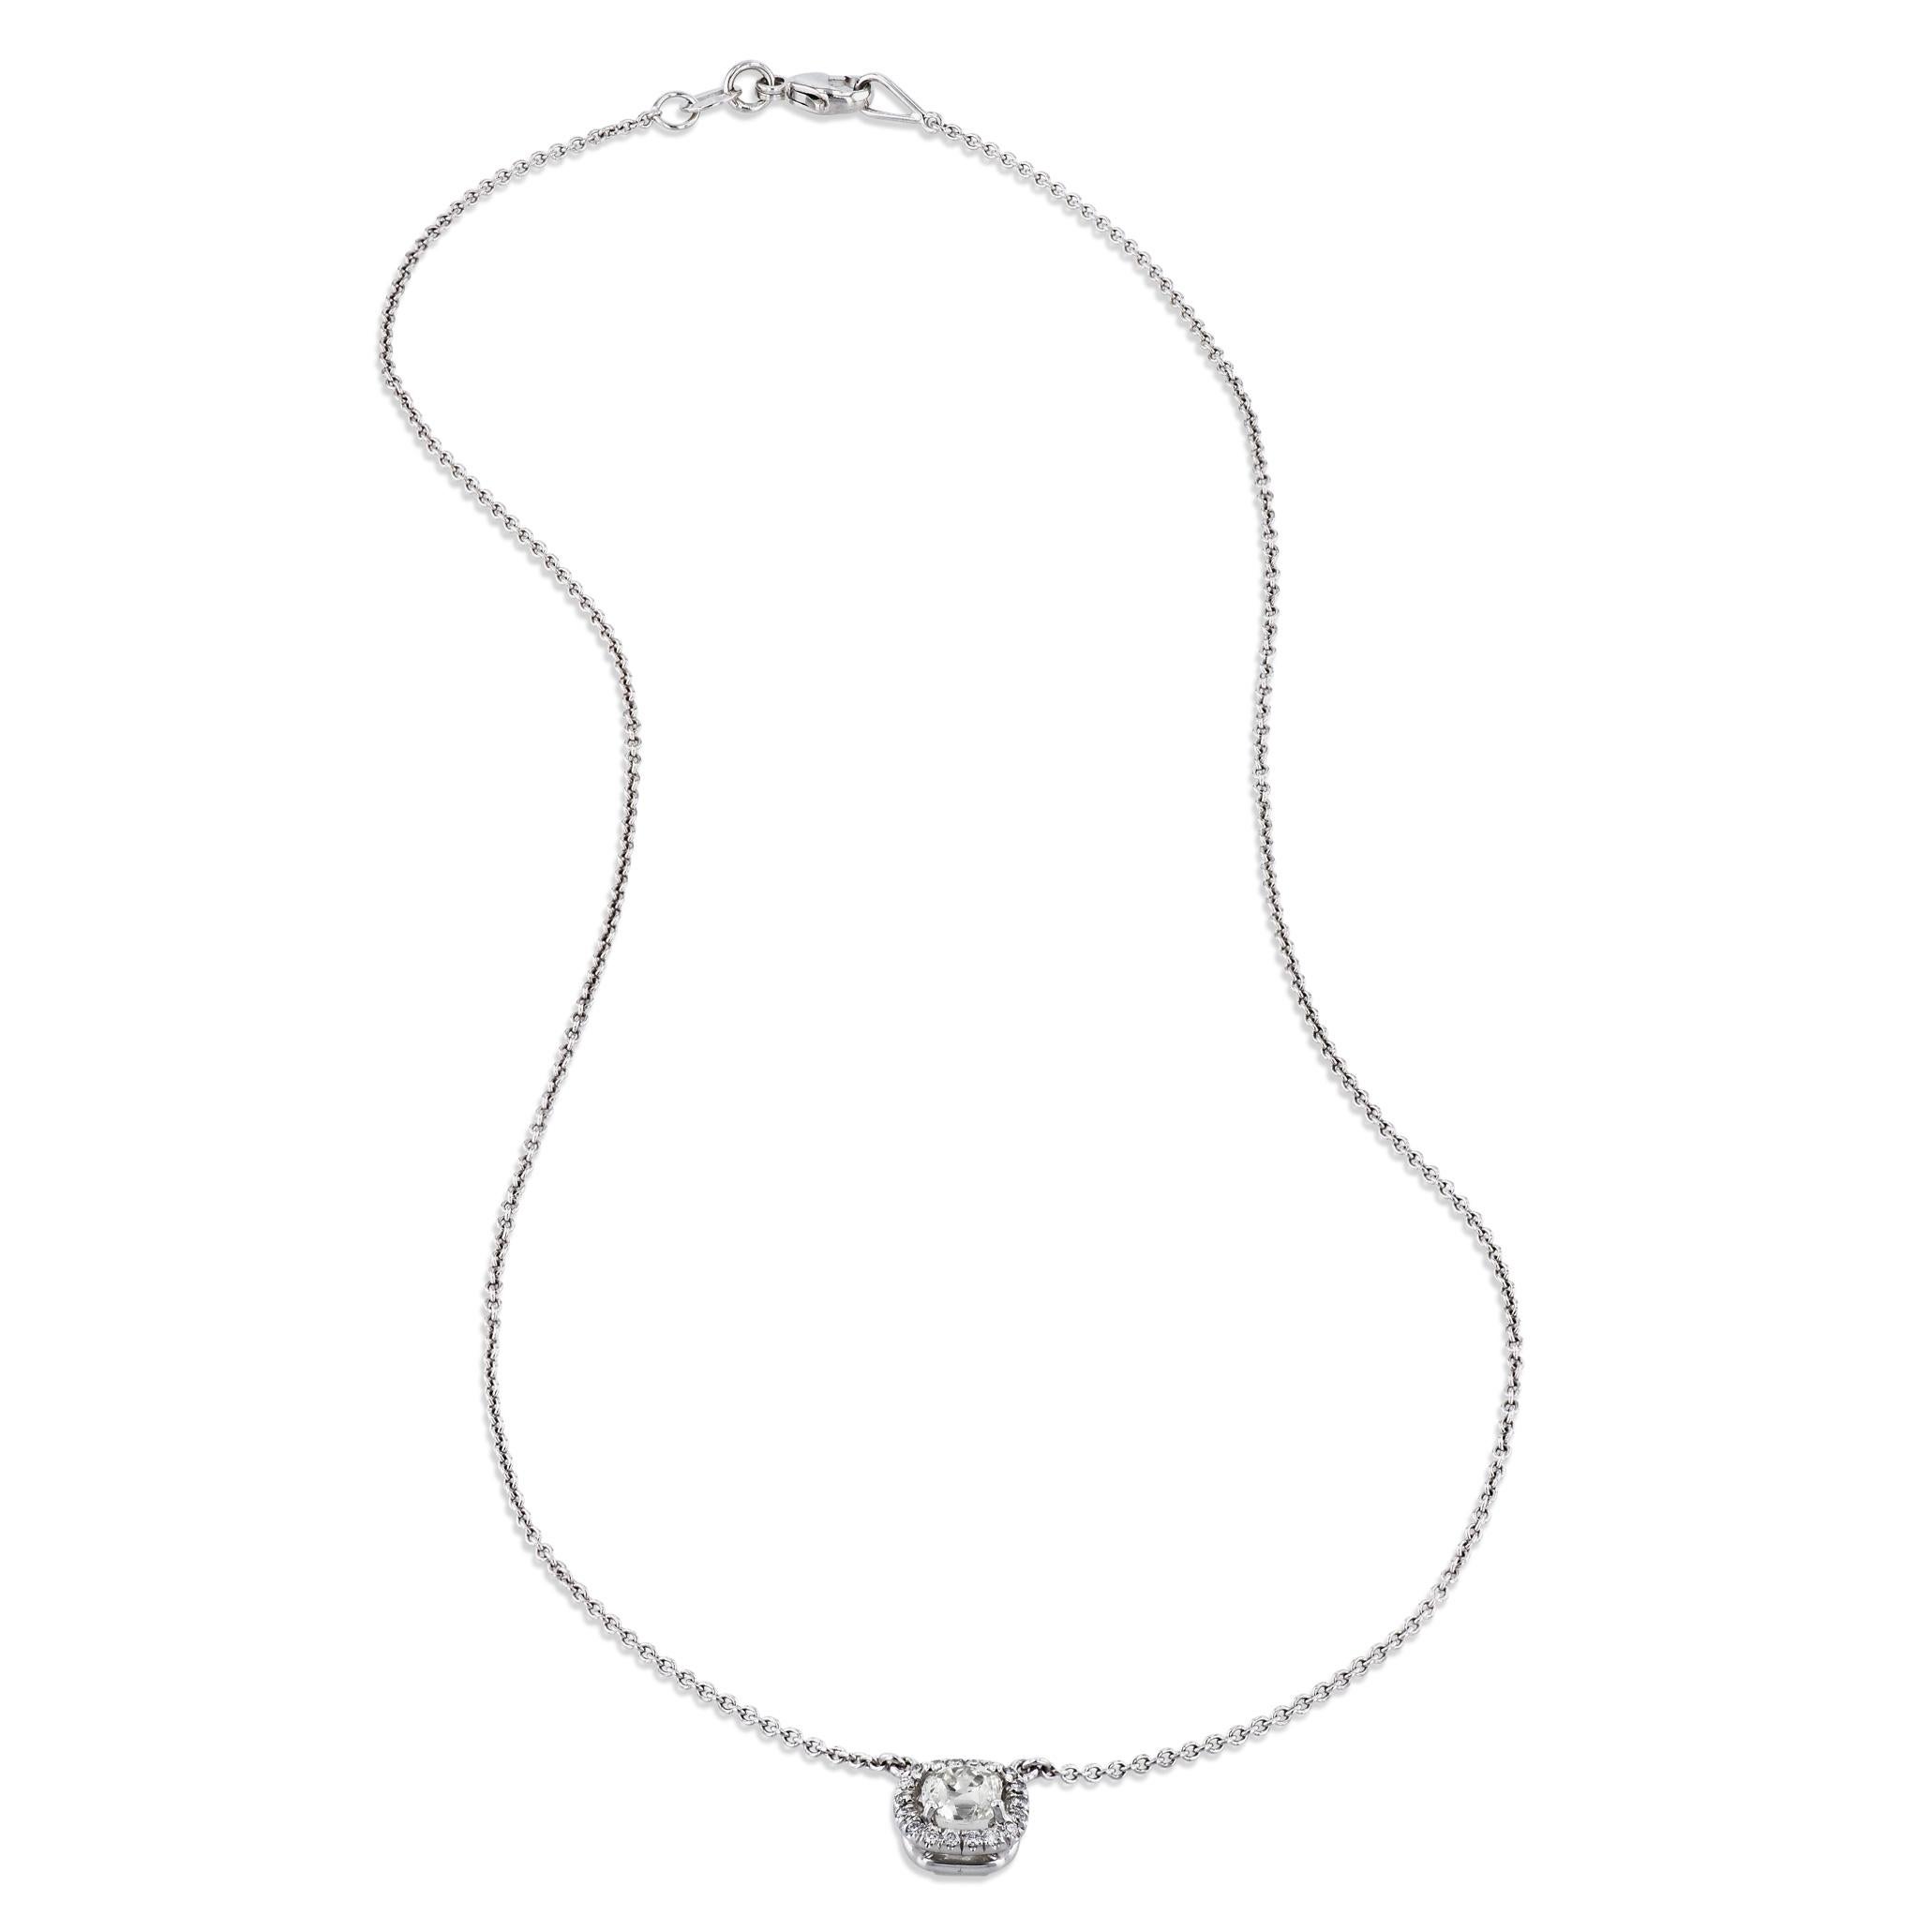 This magnificent Old Mine Cushion Cut White Gold Diamond Pave Pendant Necklace is exquisitely crafted with 18k white gold and features a spectacular Old Mine Cushion Cut diamond at the center. Captivatingly framed with sparkling diamond pave, it's